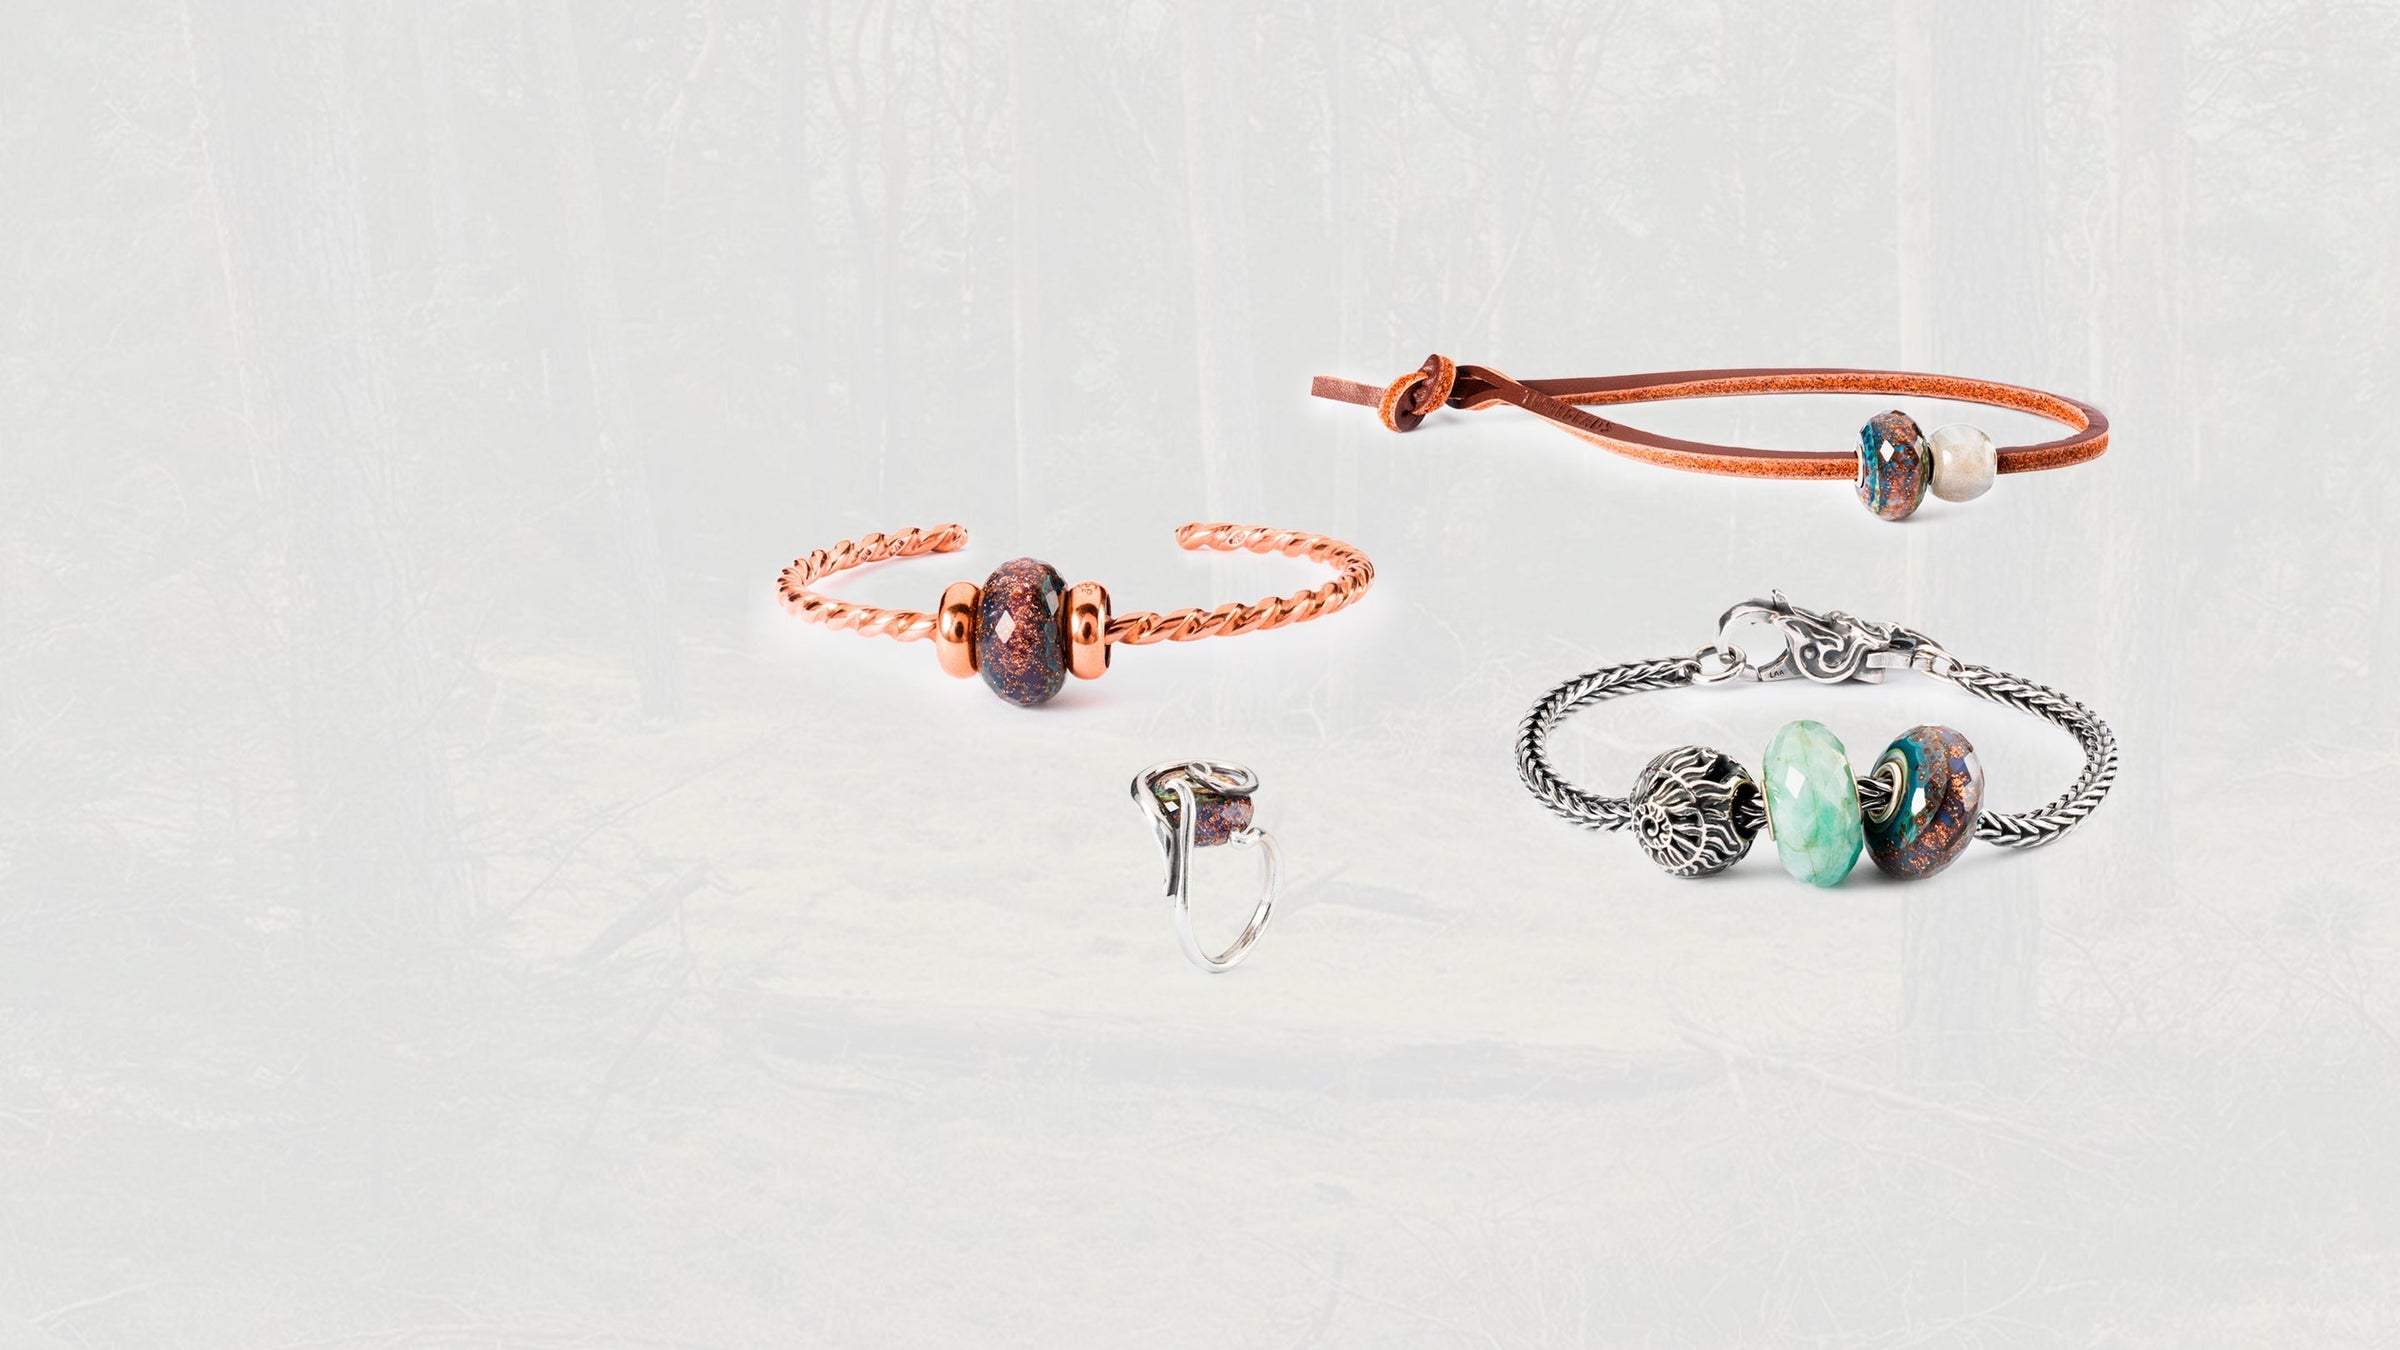 Trolls Agate bead jewelry combinations, on a bangle, ring, leather bracelet and silver bracelet